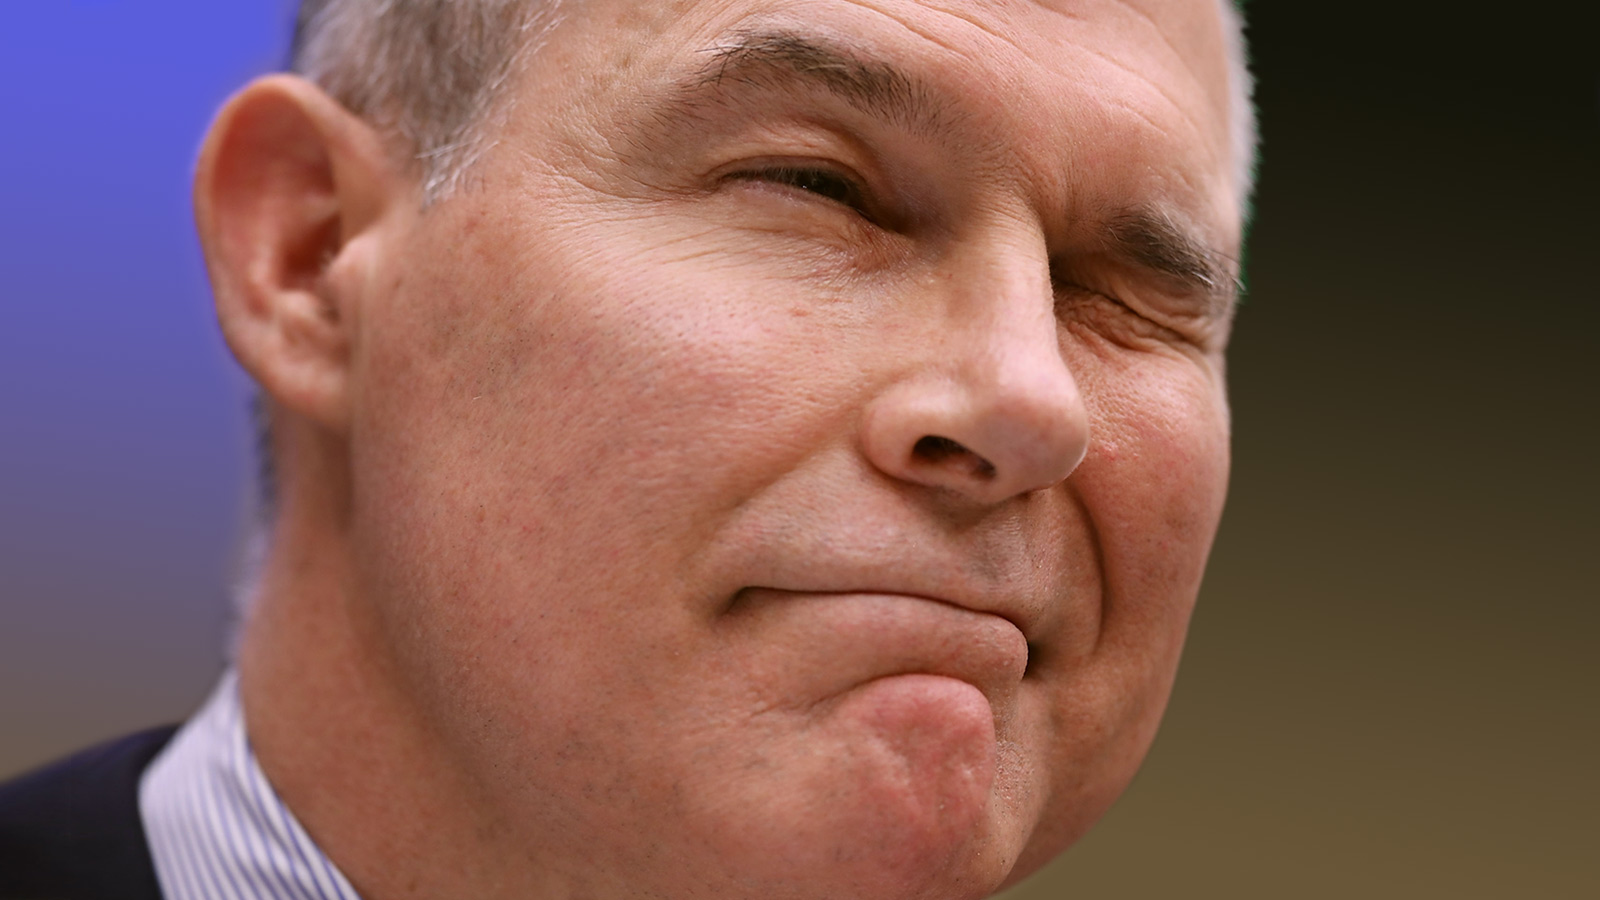 Former Environmental Protection Agency Administrator Scott Pruitt winks to lawmakers while testifying before the House Energy and Commerce Committee's Environment Subcommittee